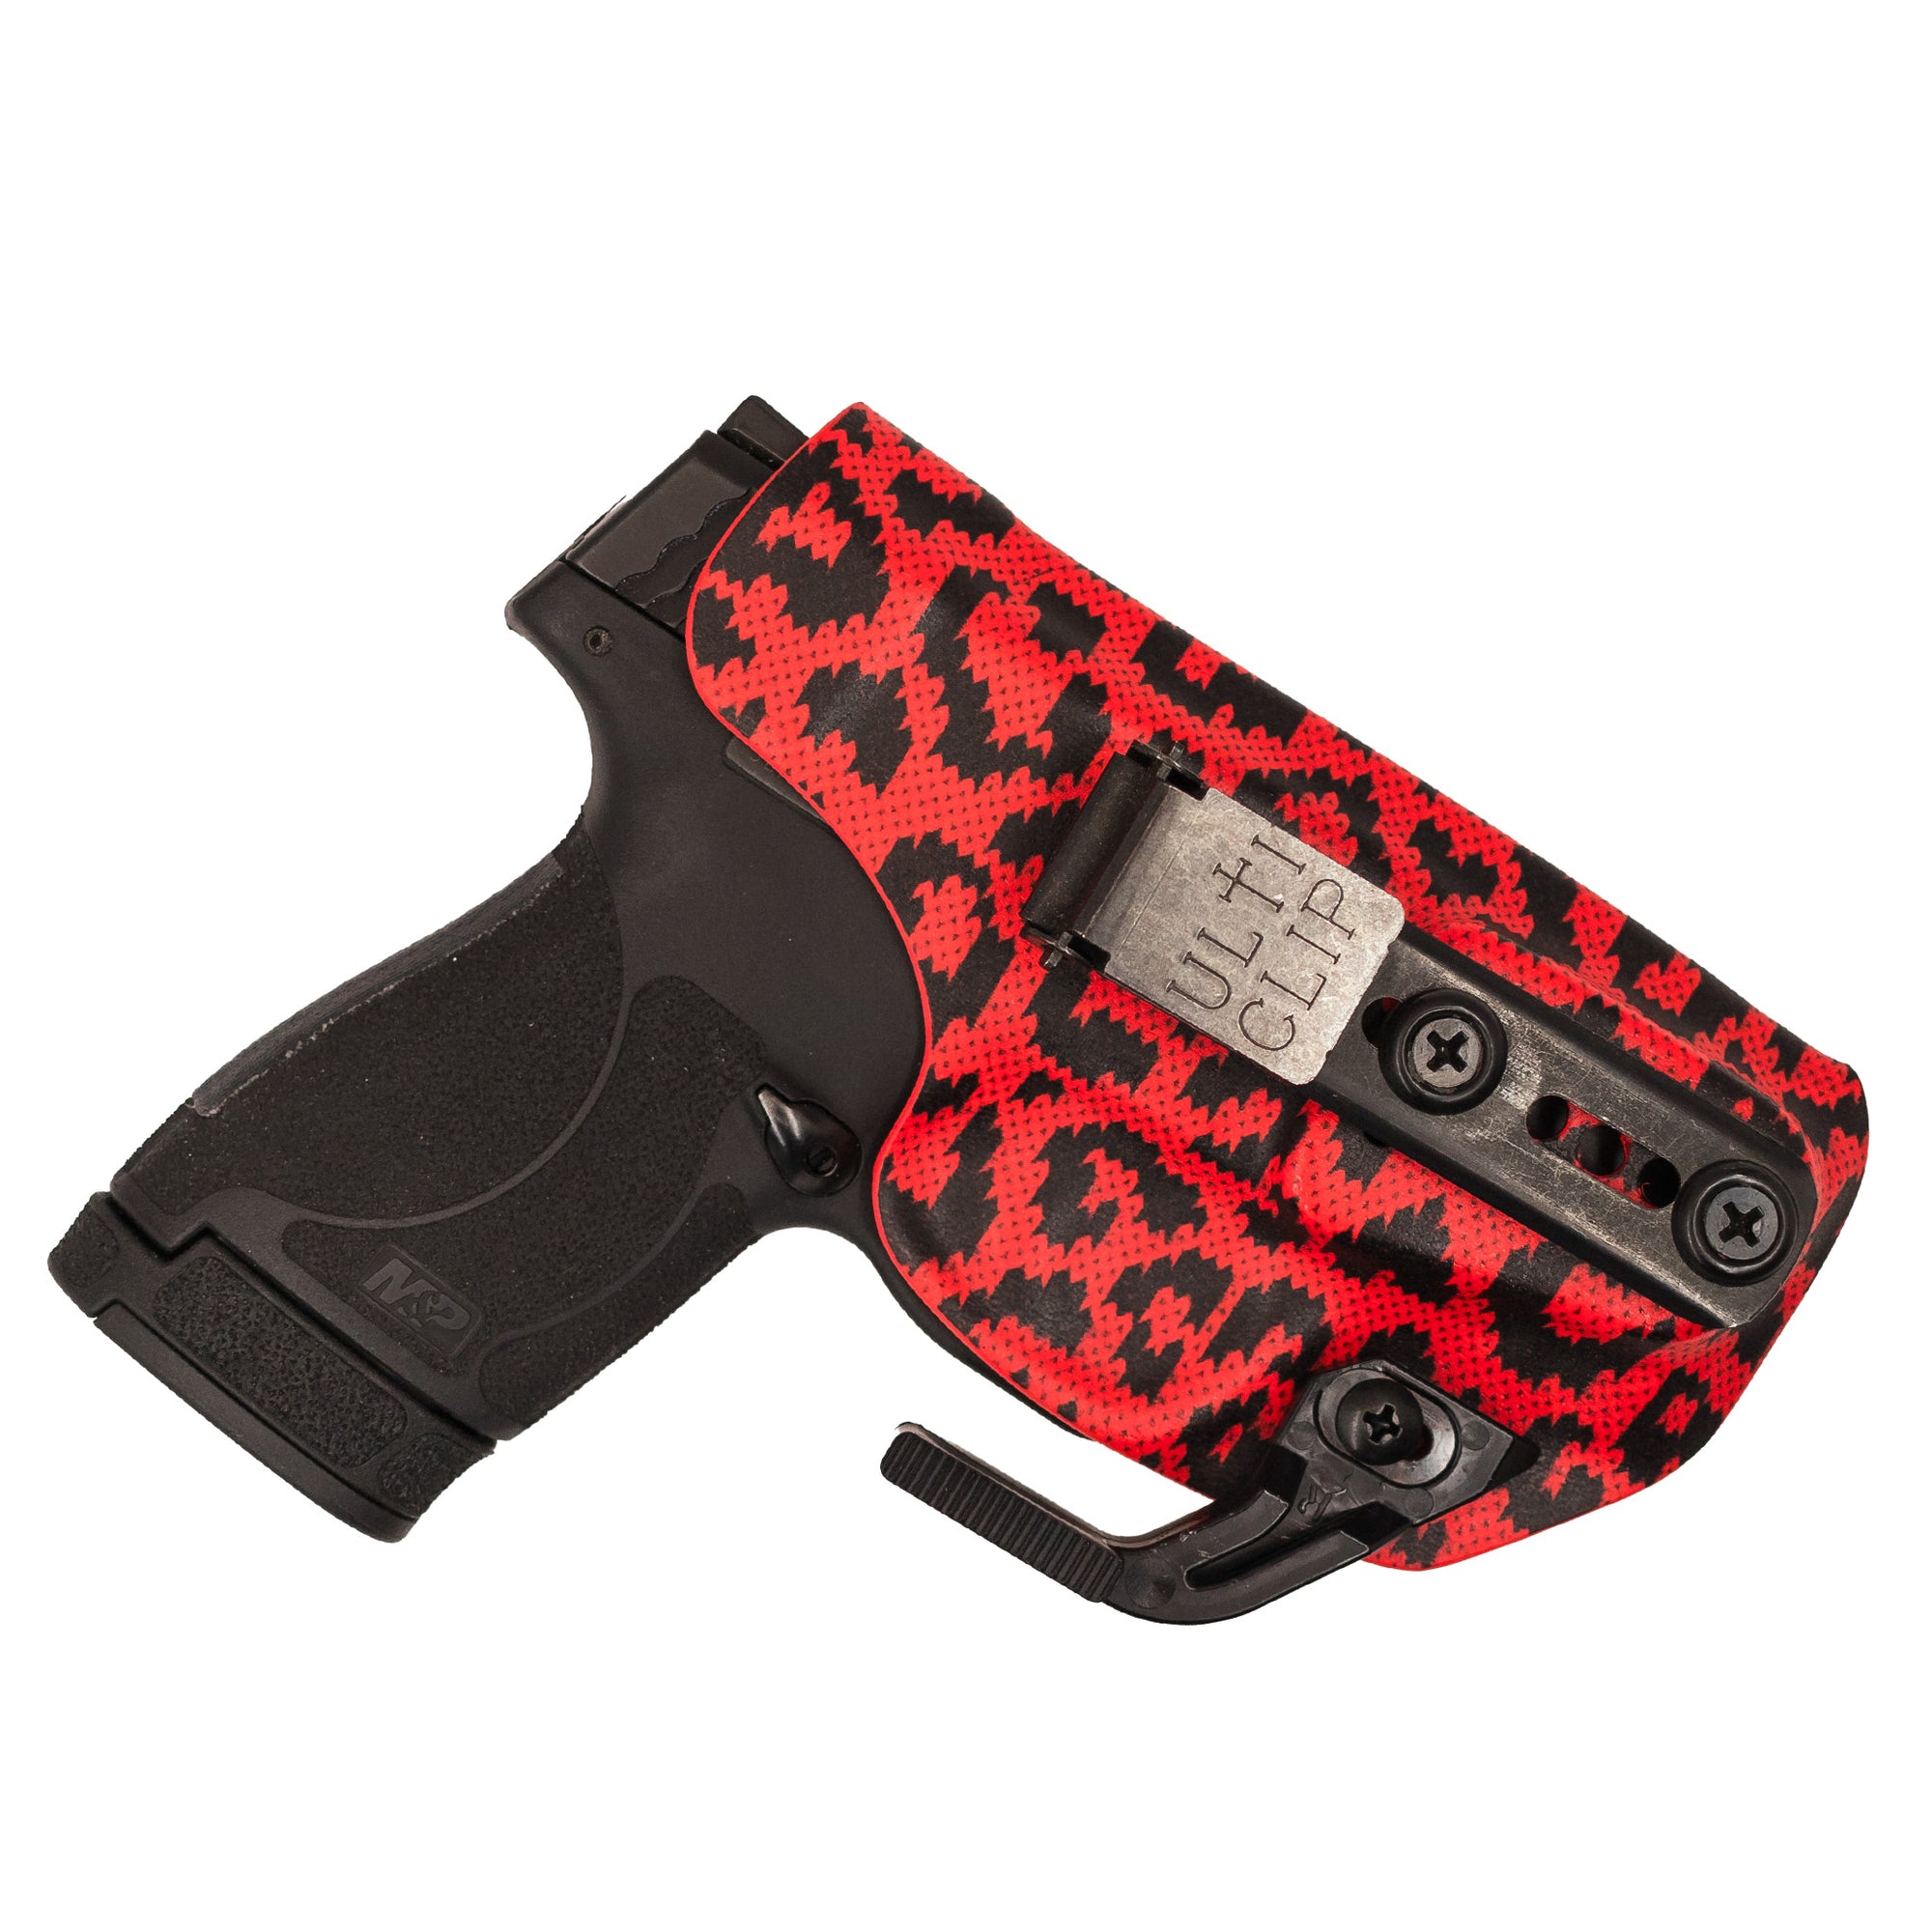 Flashbang Bra Holster - Blue Paisley anyone?!?! 🙌- Blue Paisley Betty 2.0  With Concealment wing 🙌- Gun: Ruger LC9